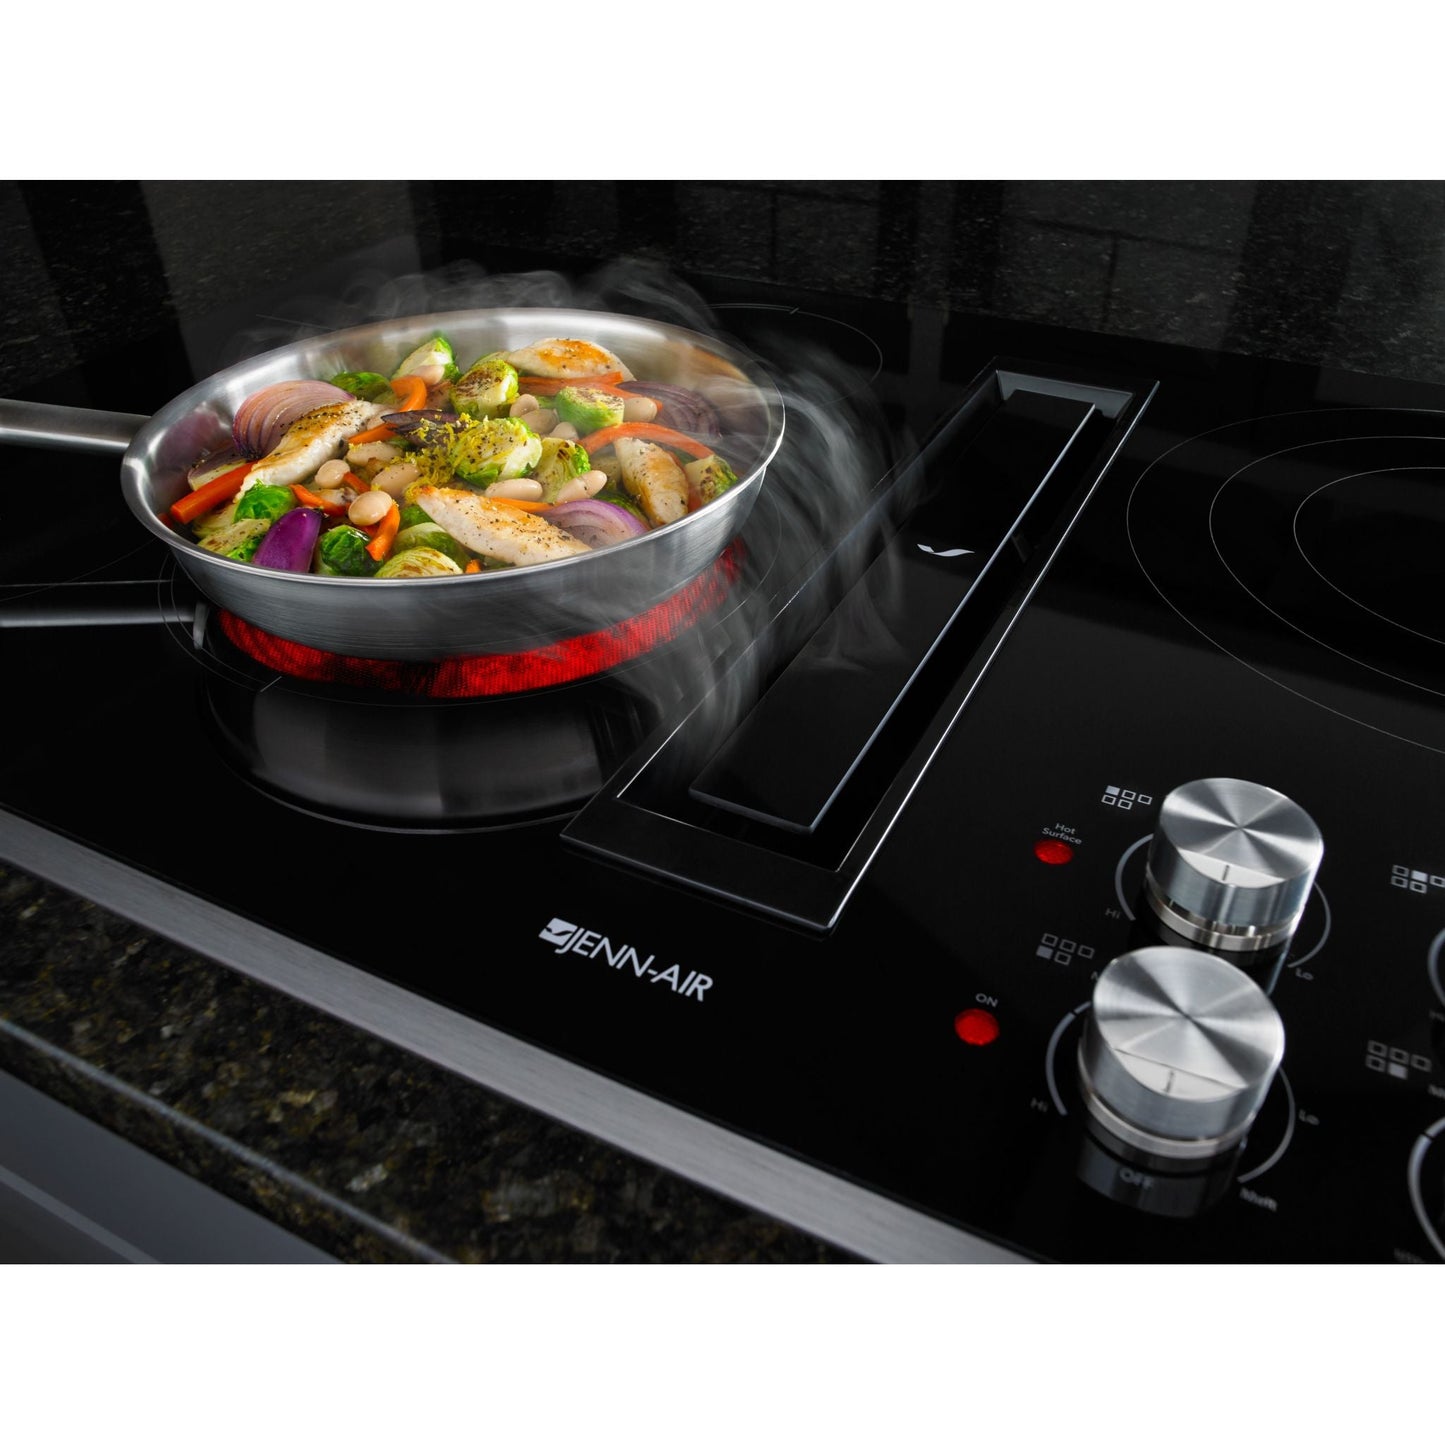 JennAir 36" Cooktop (JED3536GS) - Stainless Steel